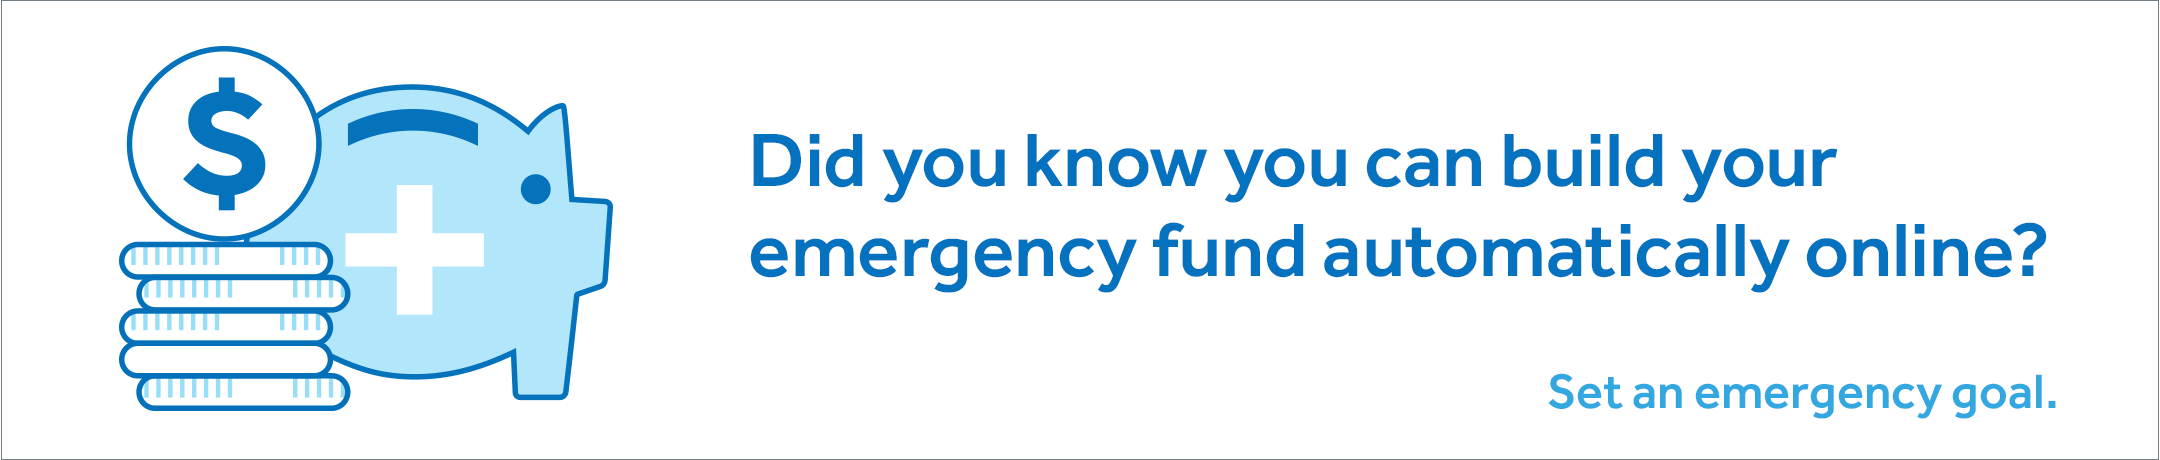 An illustration of money next to a blue piggy bank with a white cross. On the right side, it says: Did you know you can build your emergency fund automatically online? Set an emergency goal.